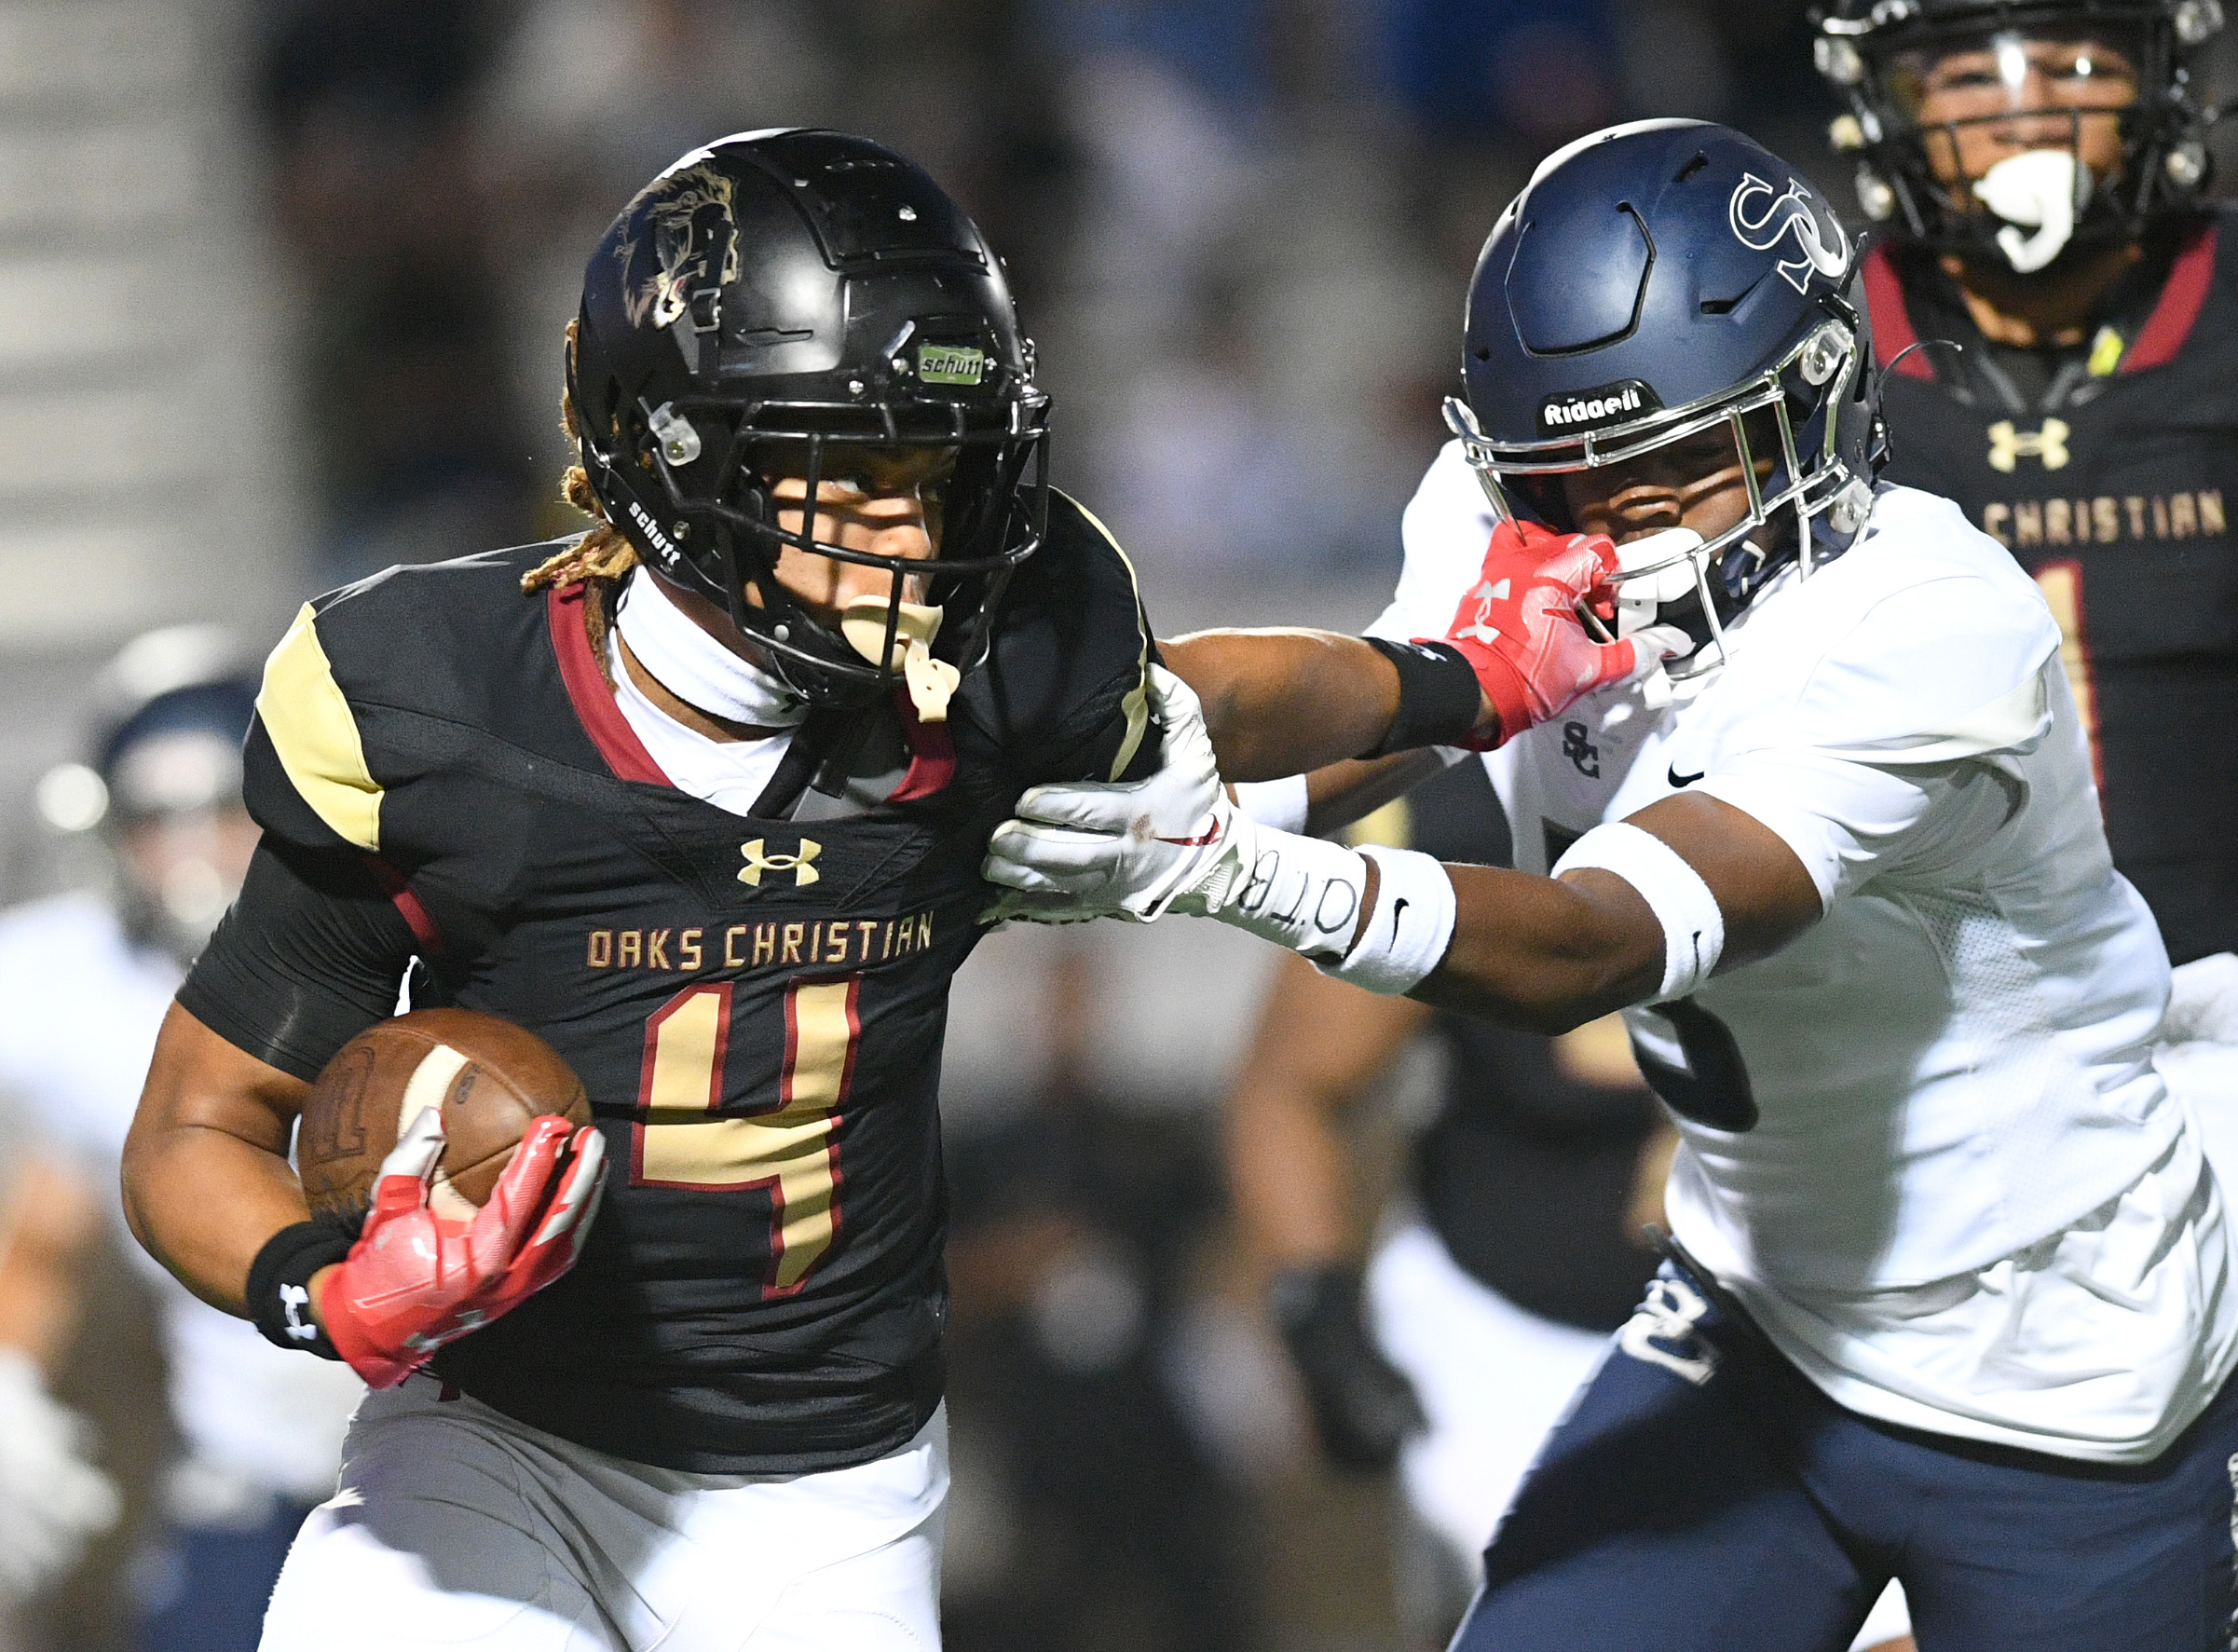 Oaks Christian running back Deshonne Redeaux carries the ball against Sierra Canyon. (Andy Holzman)